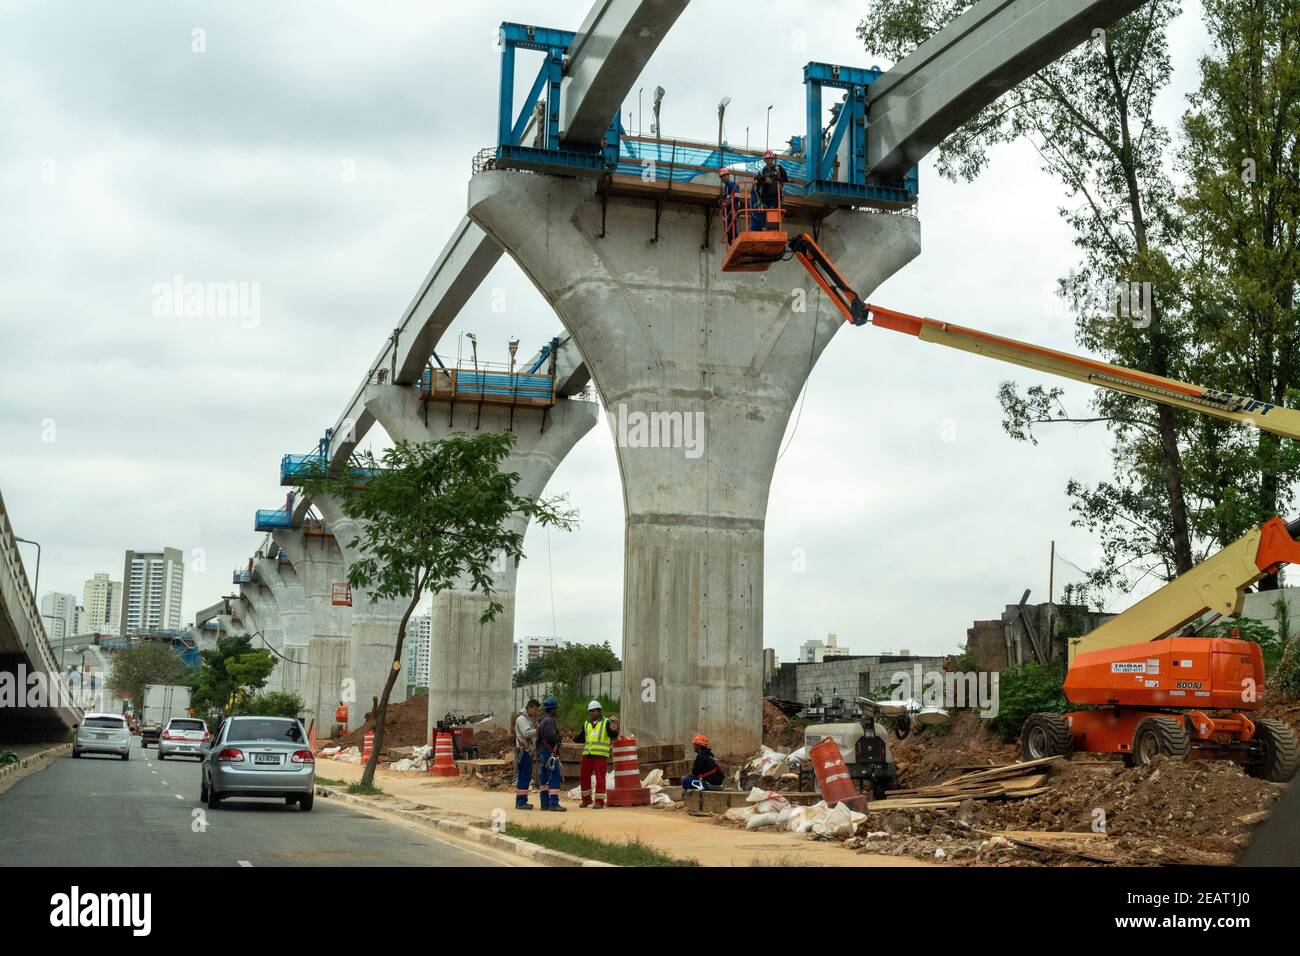 Construction of the new metro line, Line No17 (Gold line)  in Sao Paulo, Brazil.   The line carries a monorail and is part of the city's project for t Stock Photo